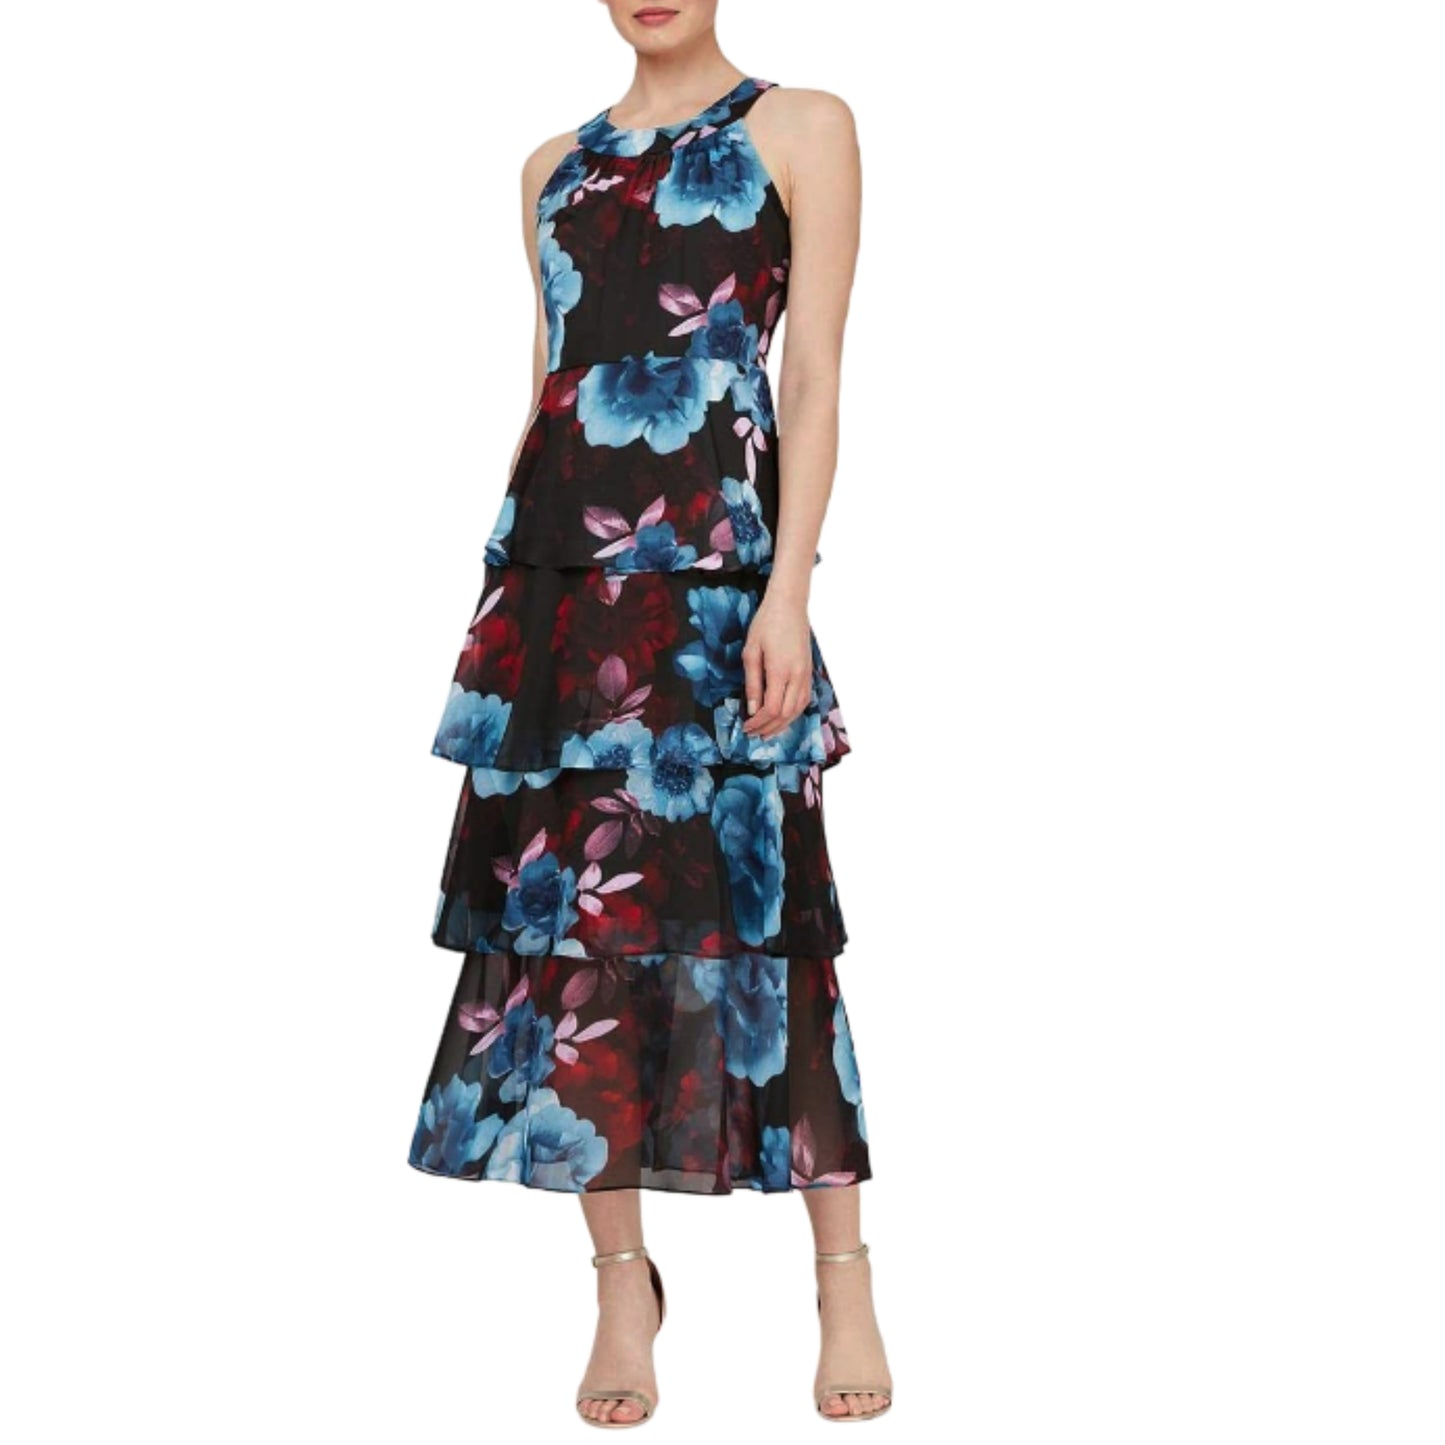 S.L. Fashions Sleeveless Floral Print Flowing Ruffle Tiered Party Maxi Dress